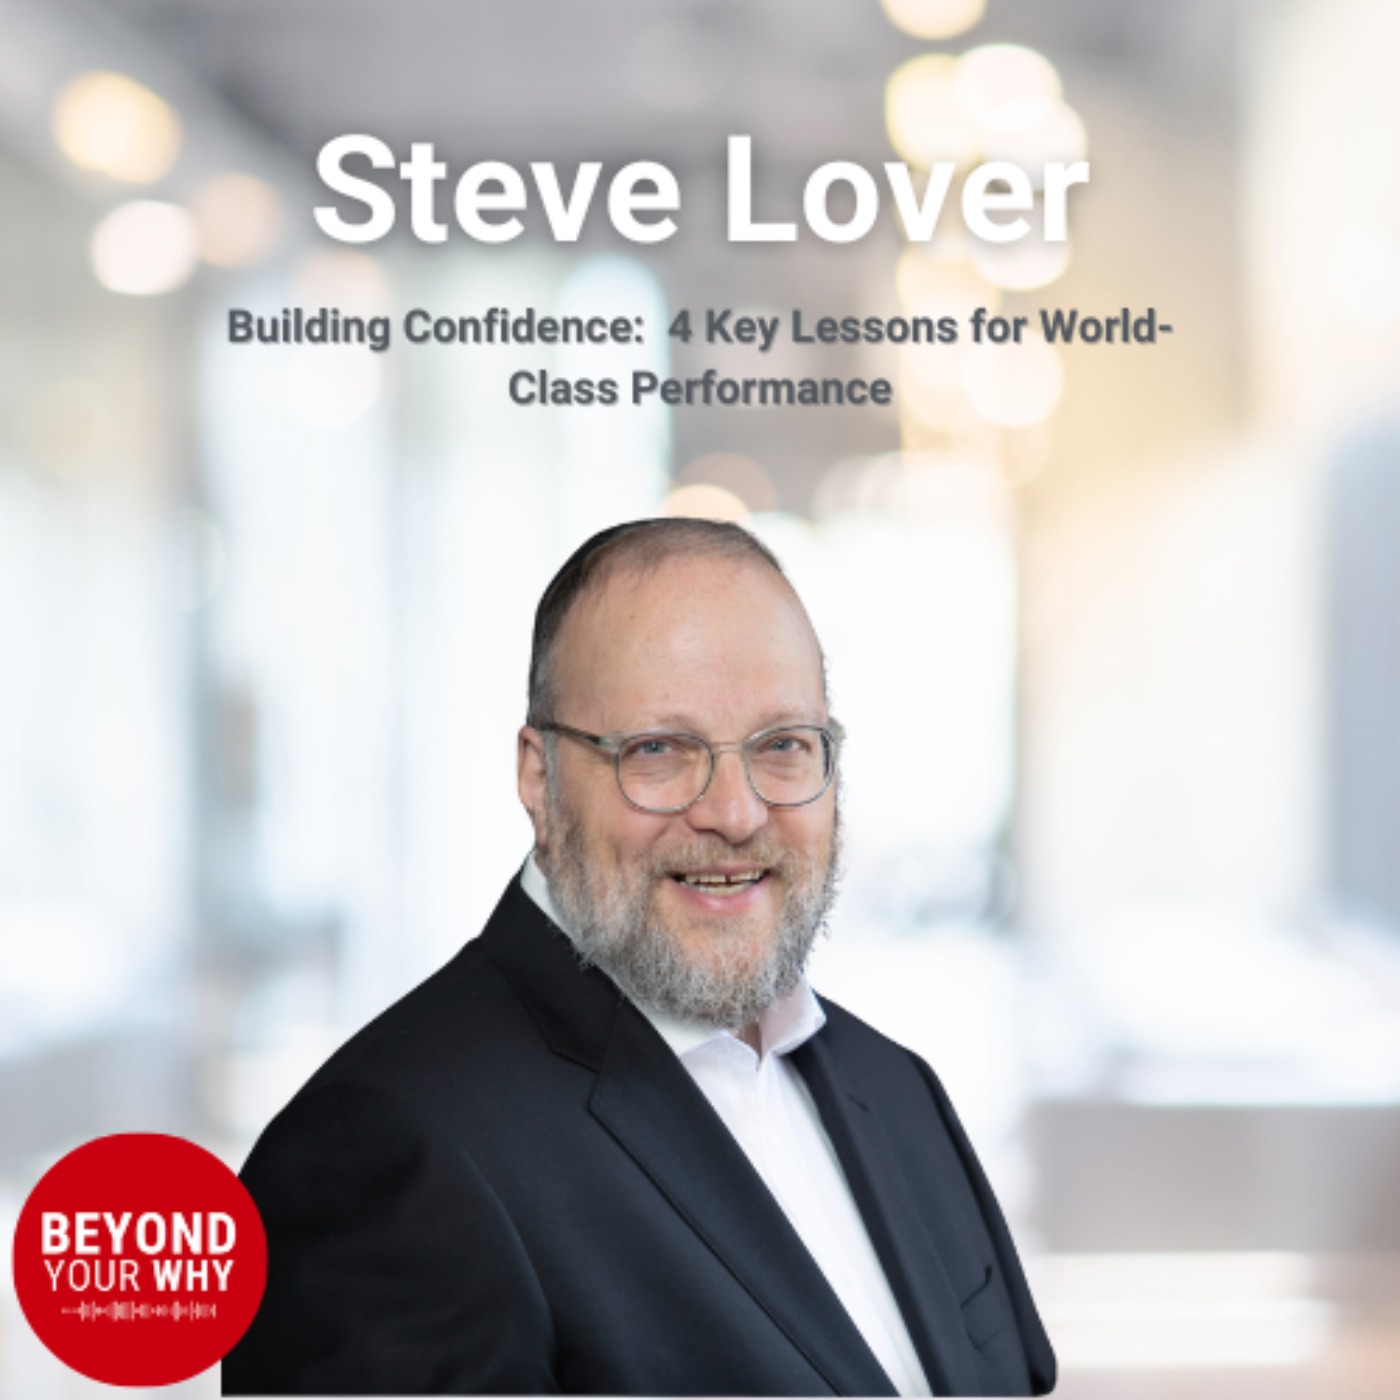 Building Confidence: 4 Key Lessons from Steve Lover for World-Class Performance